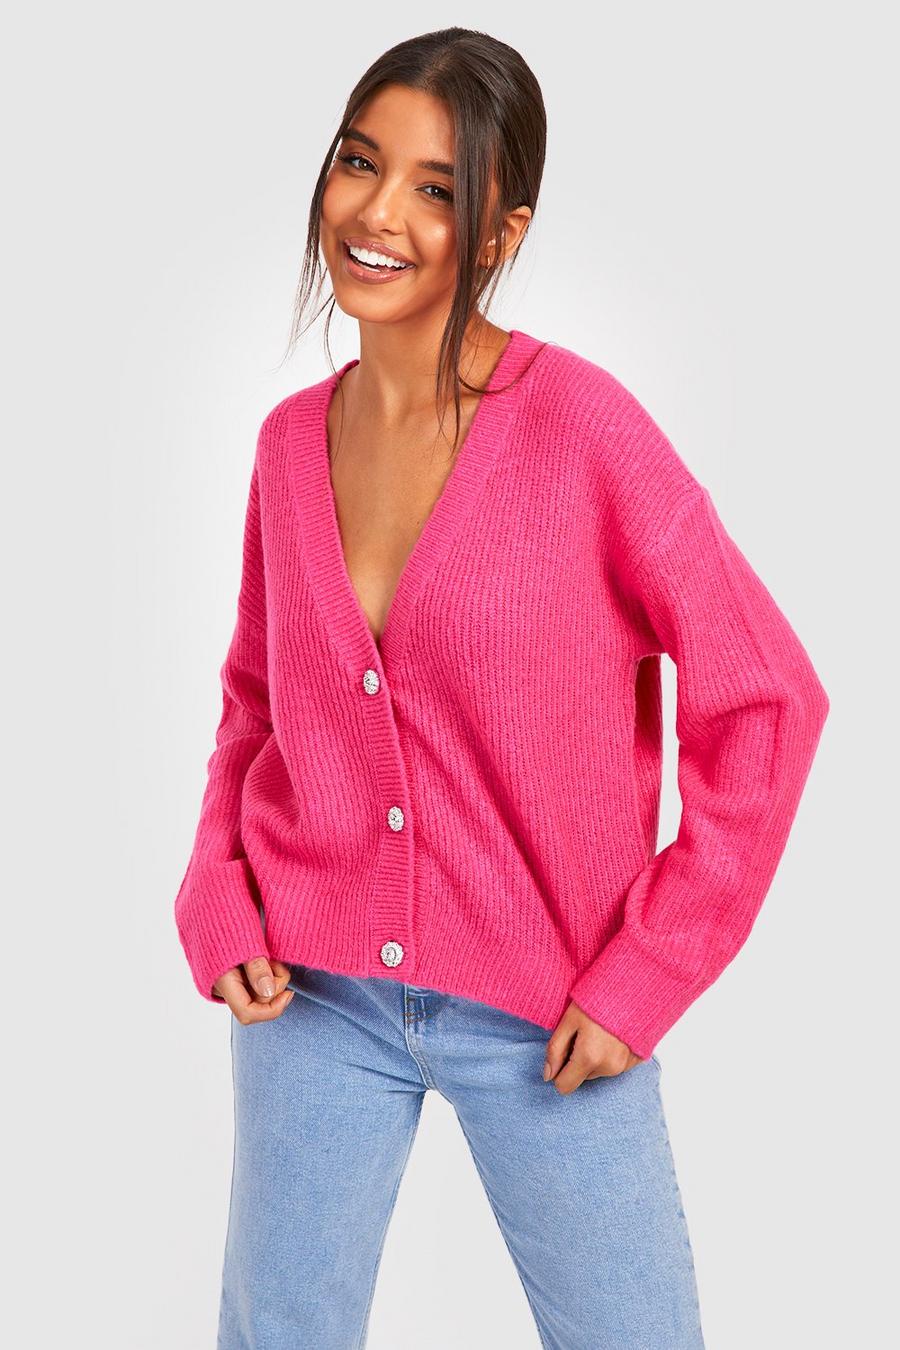 Hot pink Soft Knit Slouchy Cardigan